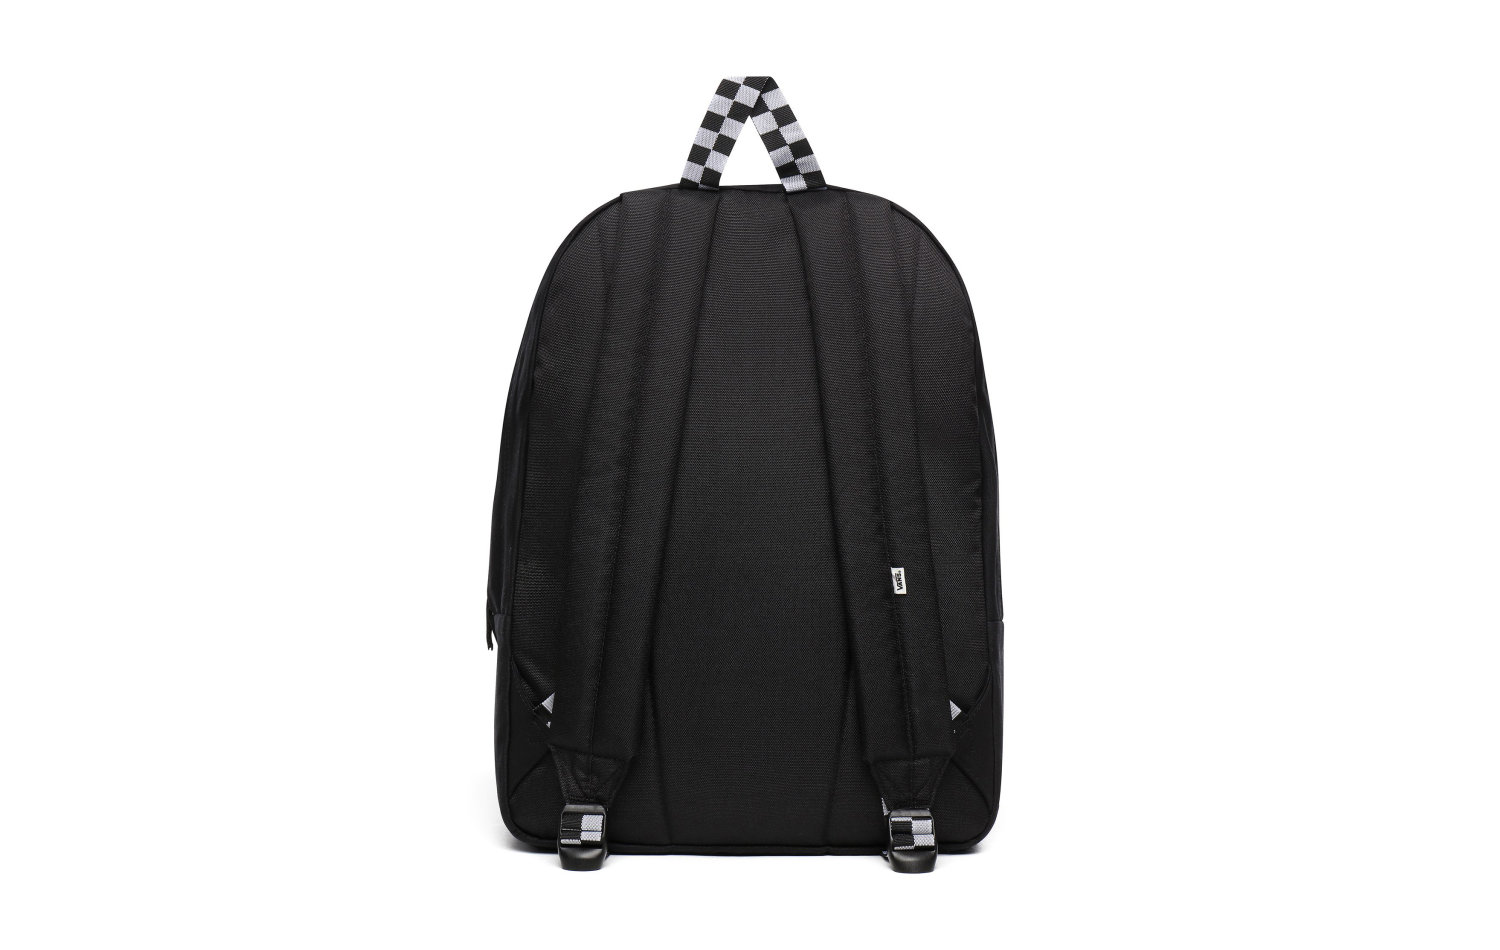 Vans Realm Backpack-color Theory (VN0A4DRMBLK)